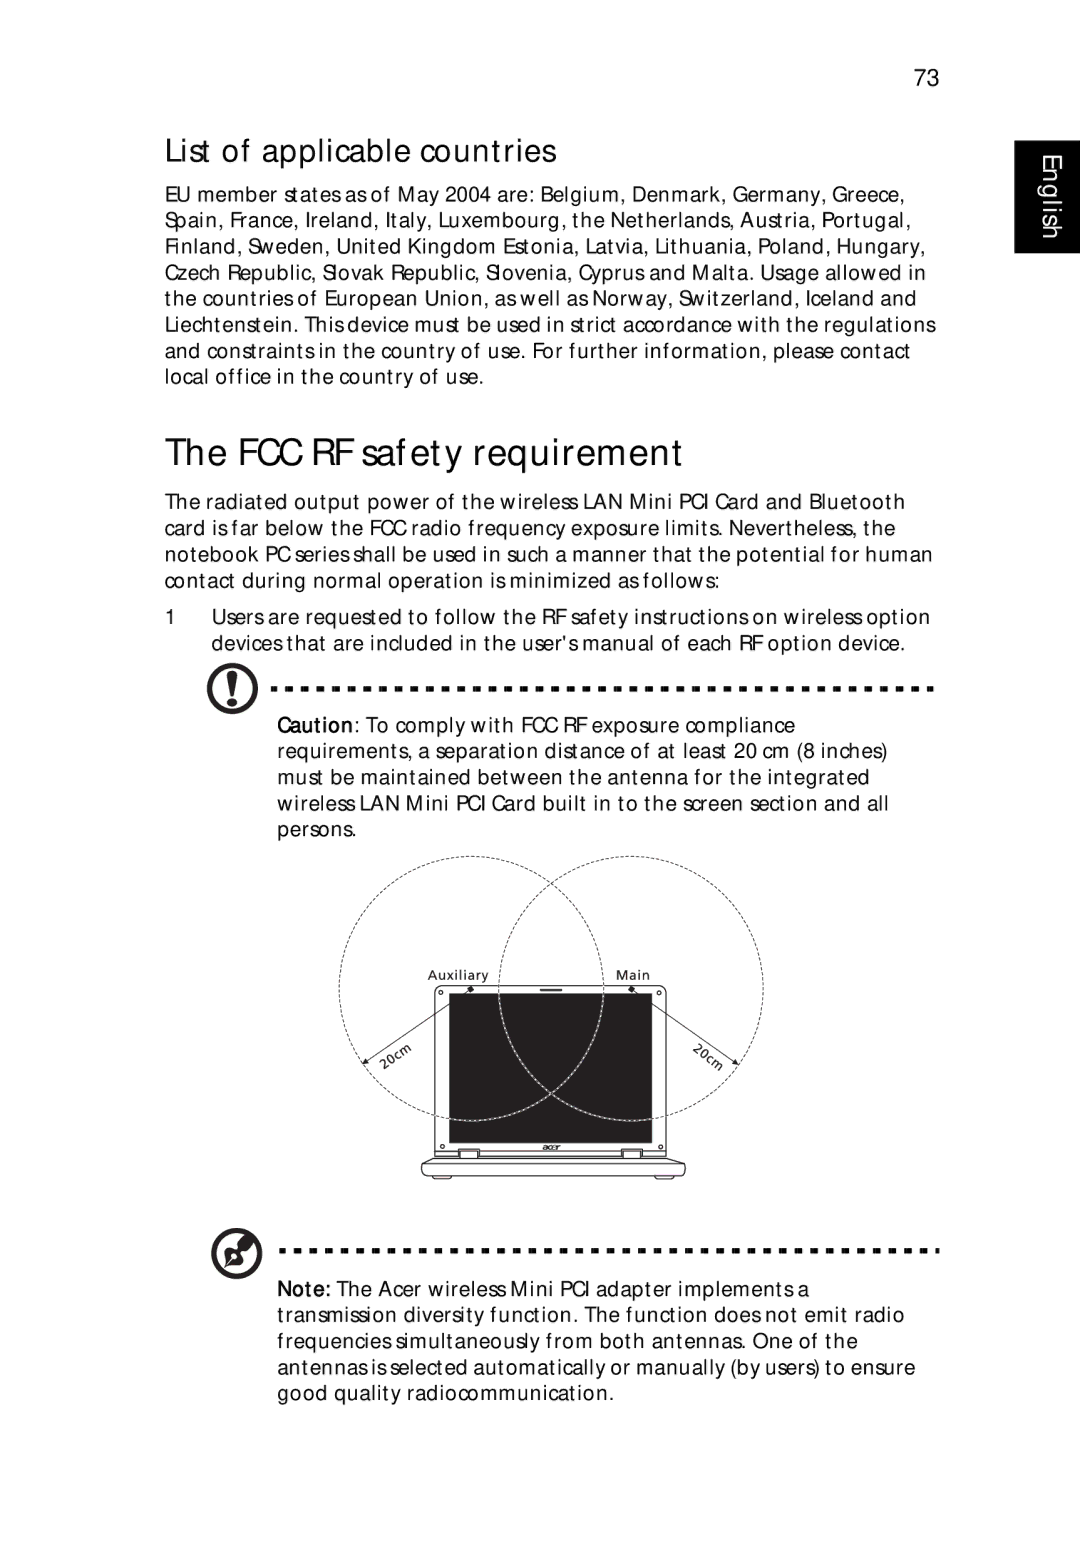 Acer 7620Z manual FCC RF safety requirement, List of applicable countries 